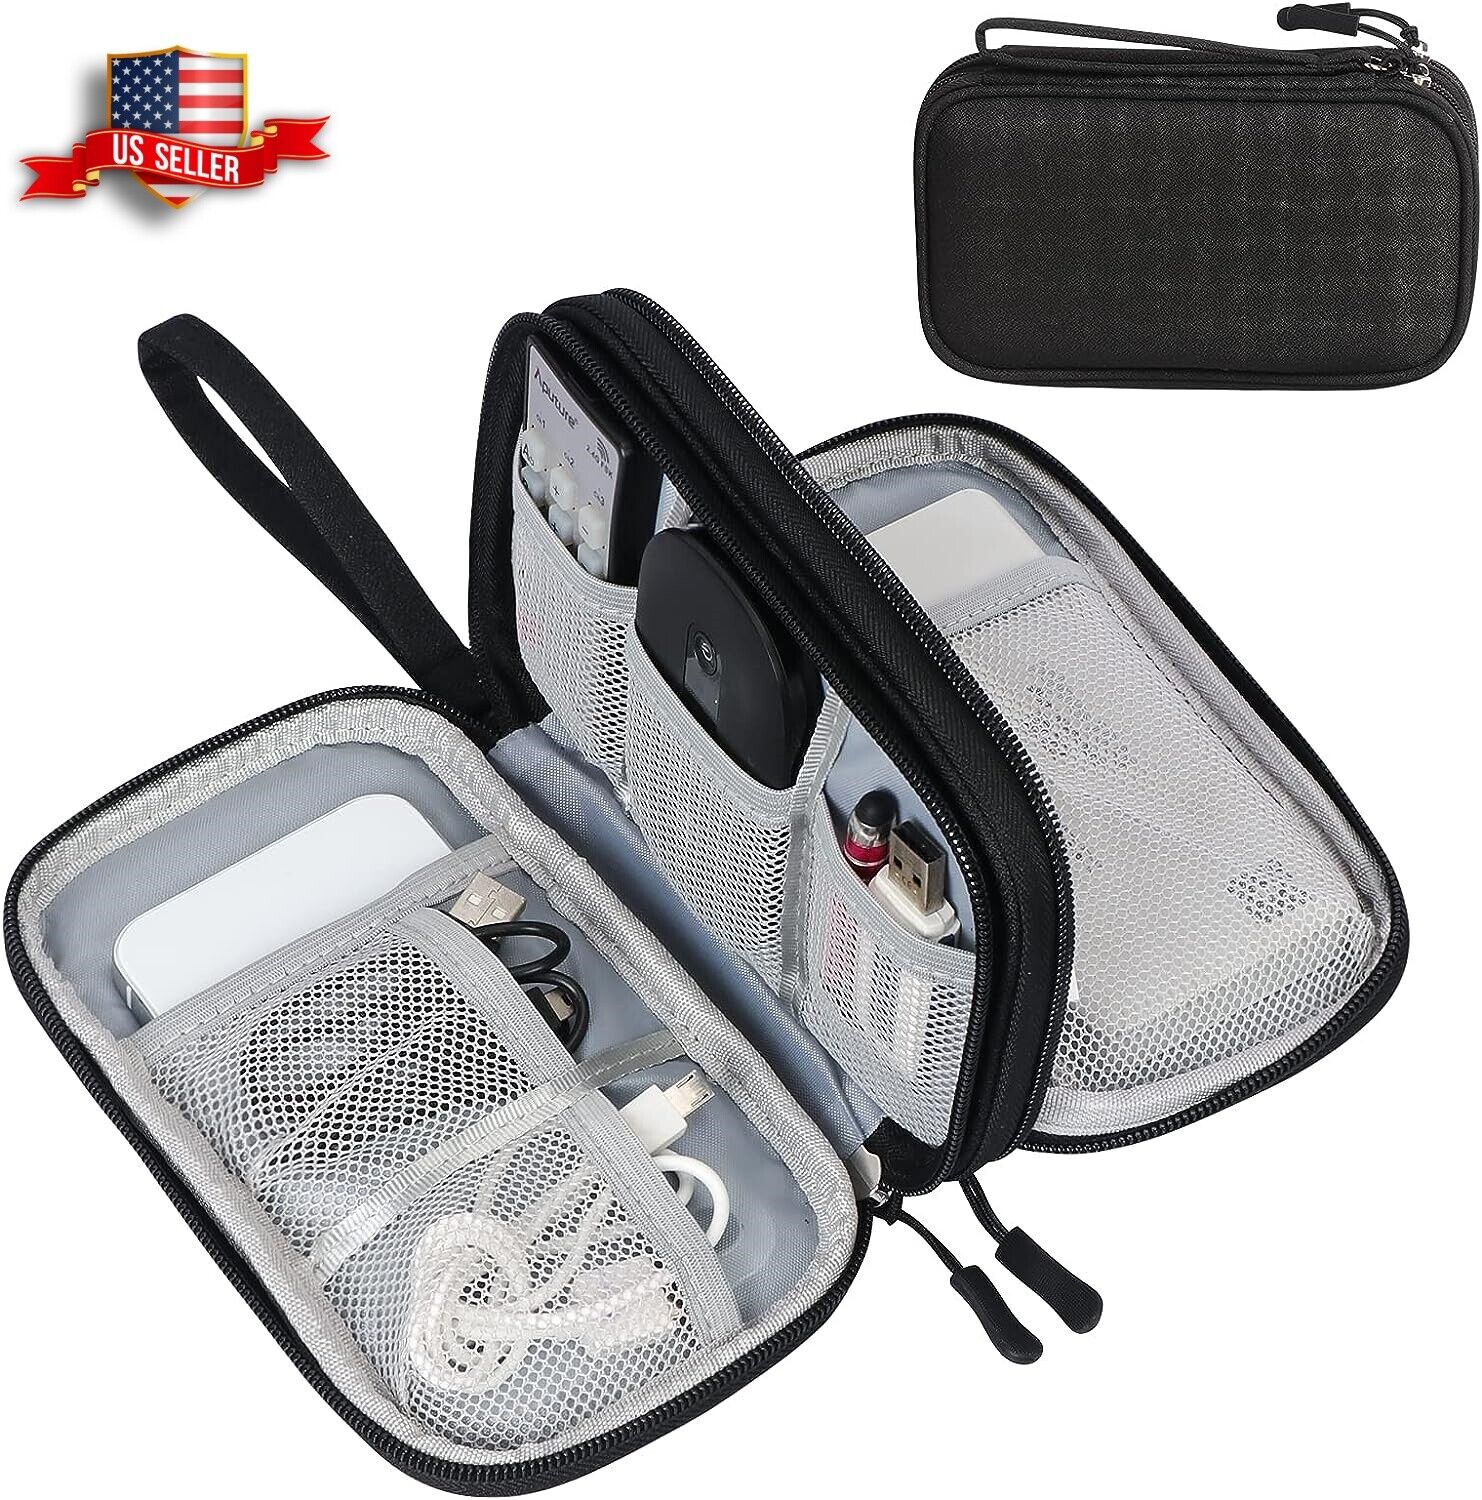 Travel Organizer Bag Cable Storage Pouch Case Portable Waterproof Double Layers